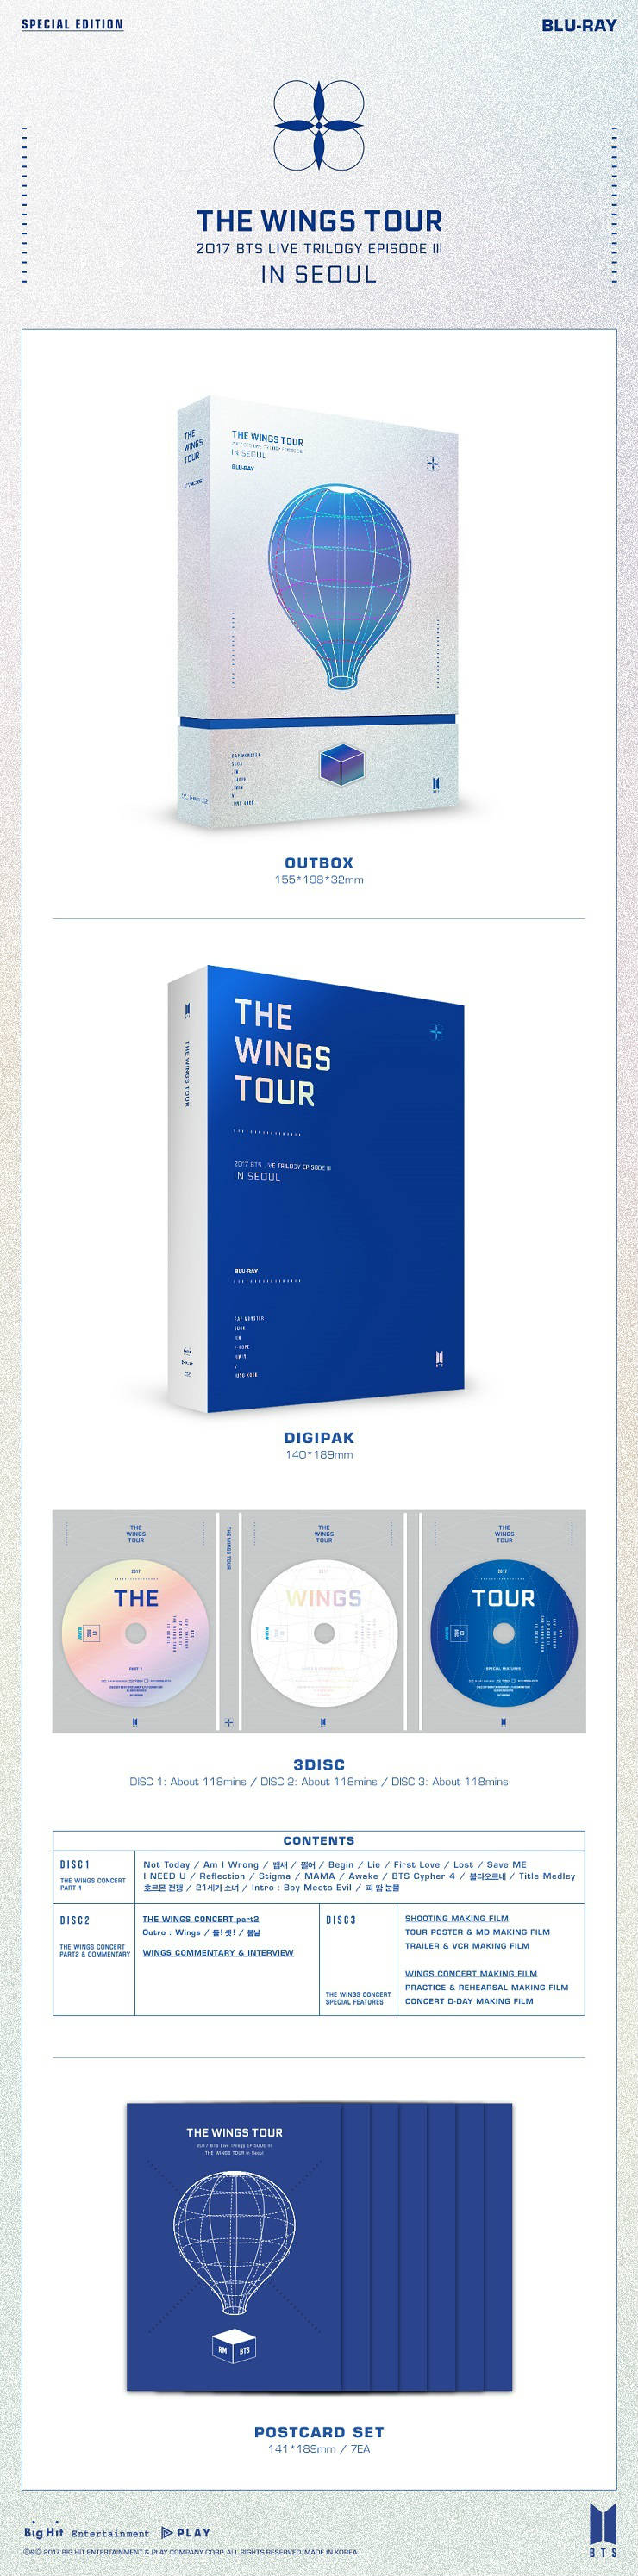 BTS THE WINGS TOUR IN SEOUL Blu-ray